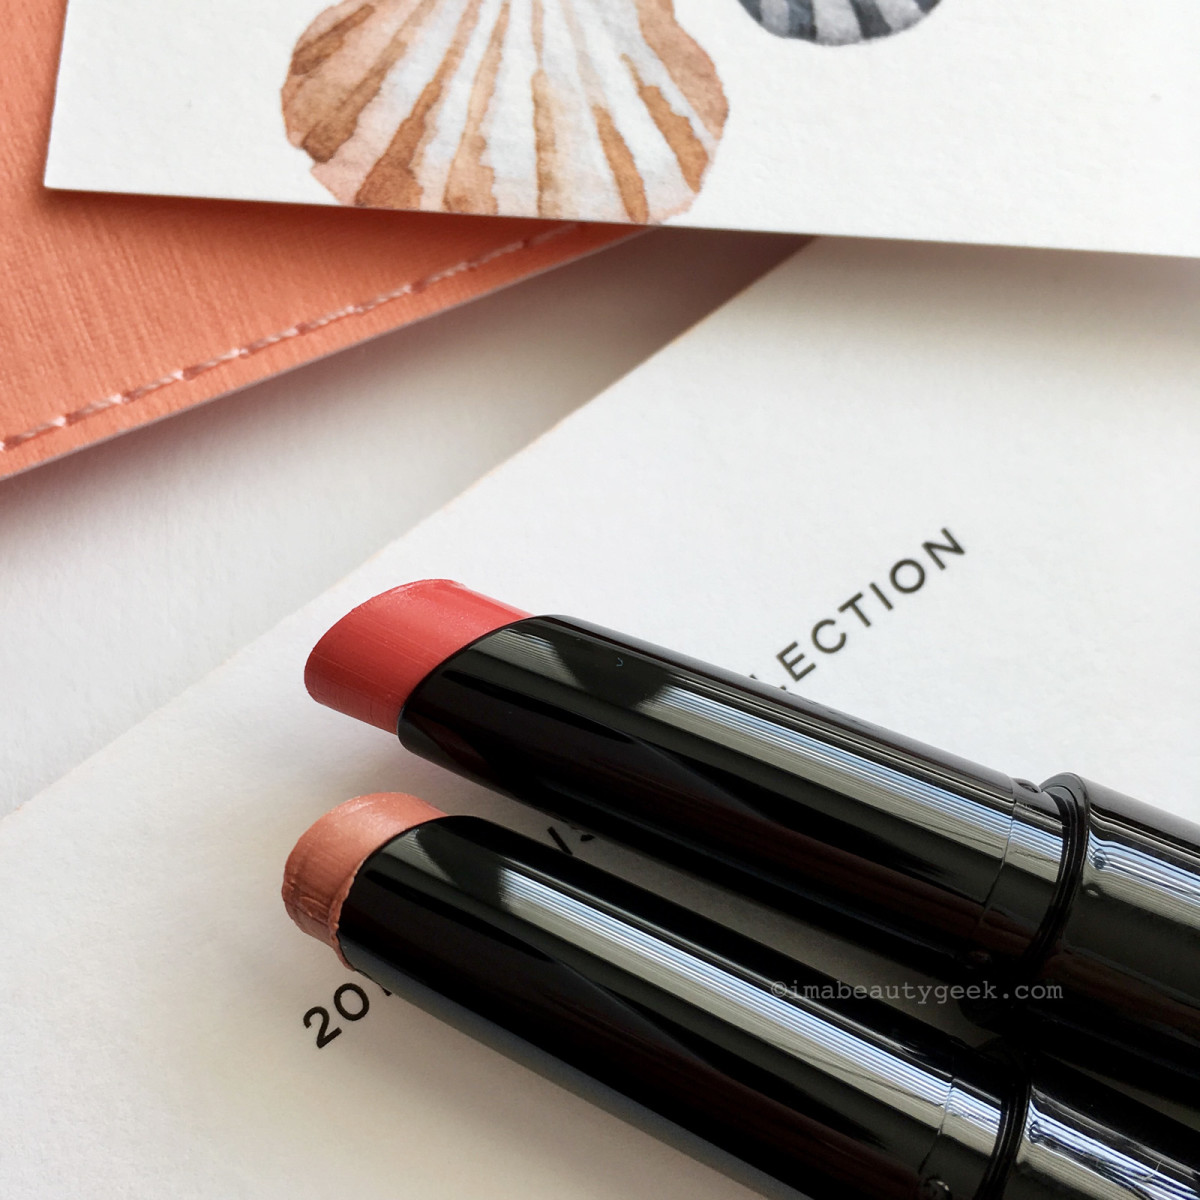 Chanel Summer 2017 Cruise Collection Rouge Coco Stylo in Panorama and Esquisse